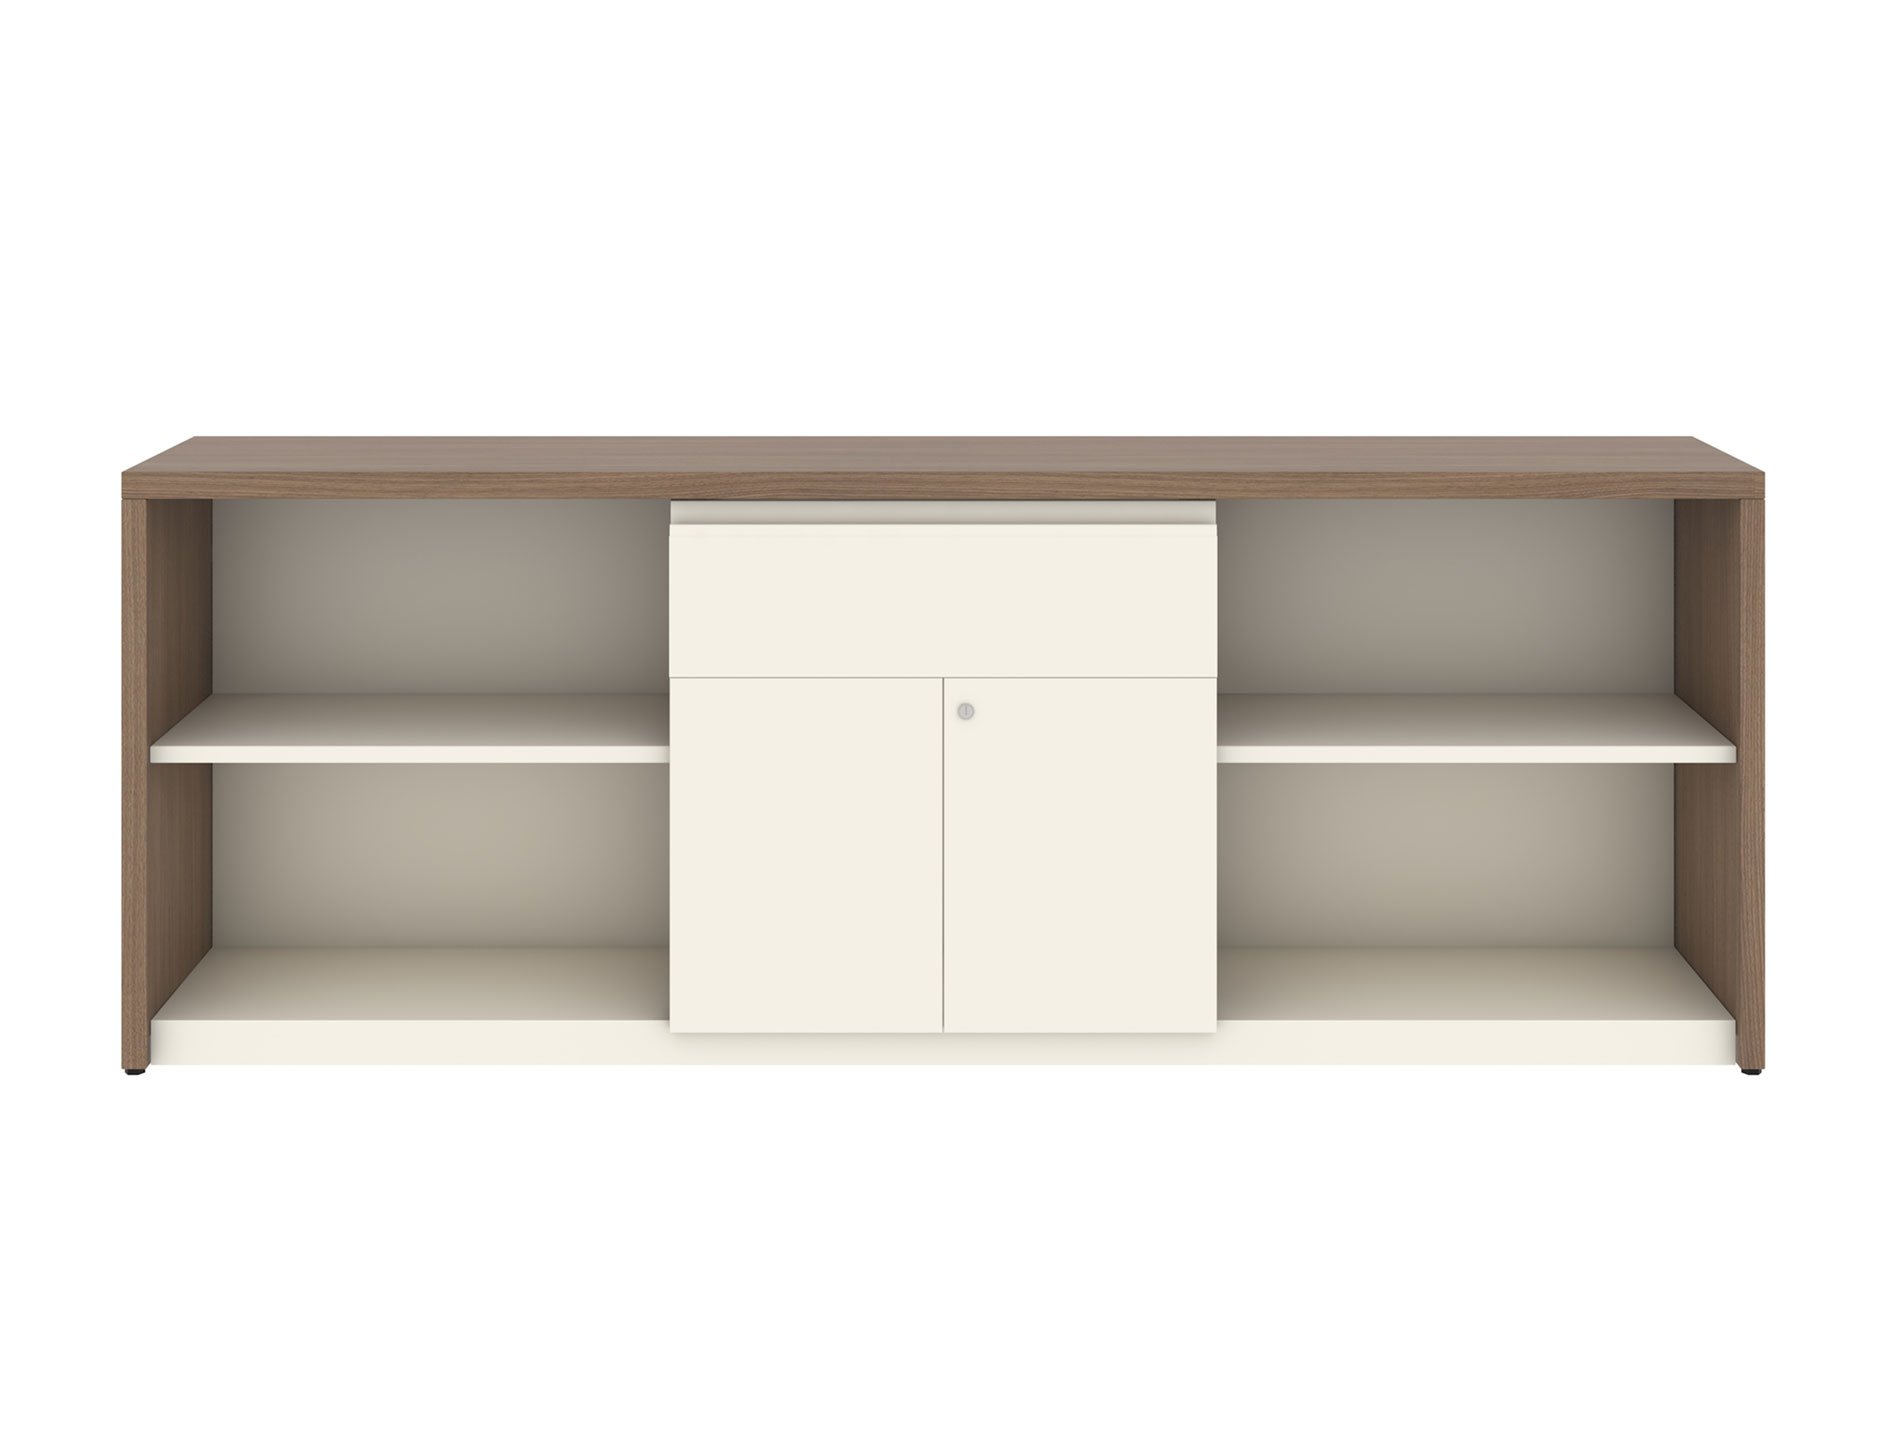 A Series credenza with open shelves and white cabinet doors